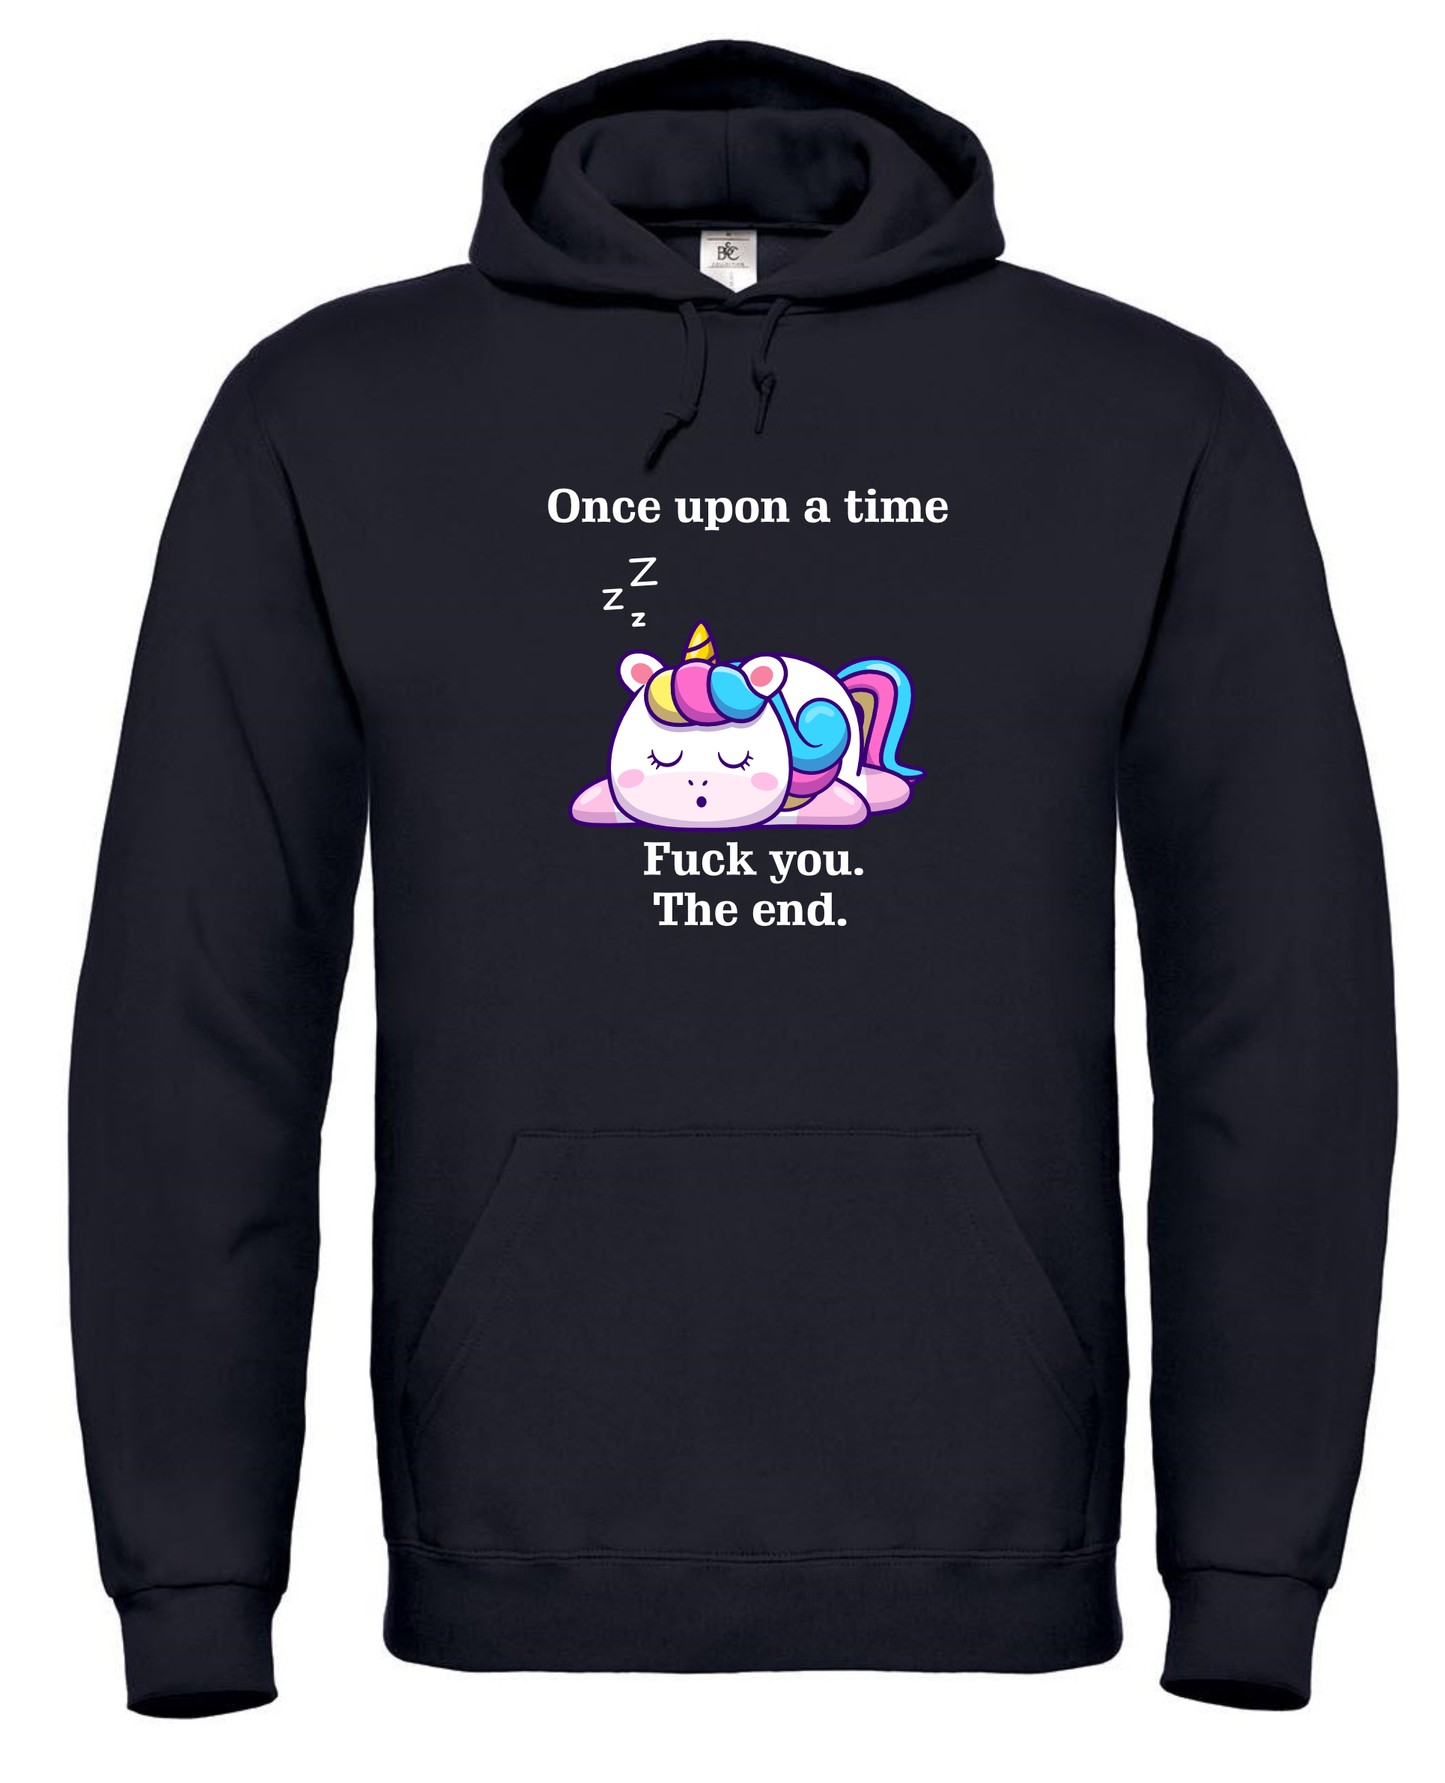 Once upon a time- Hoodie XL